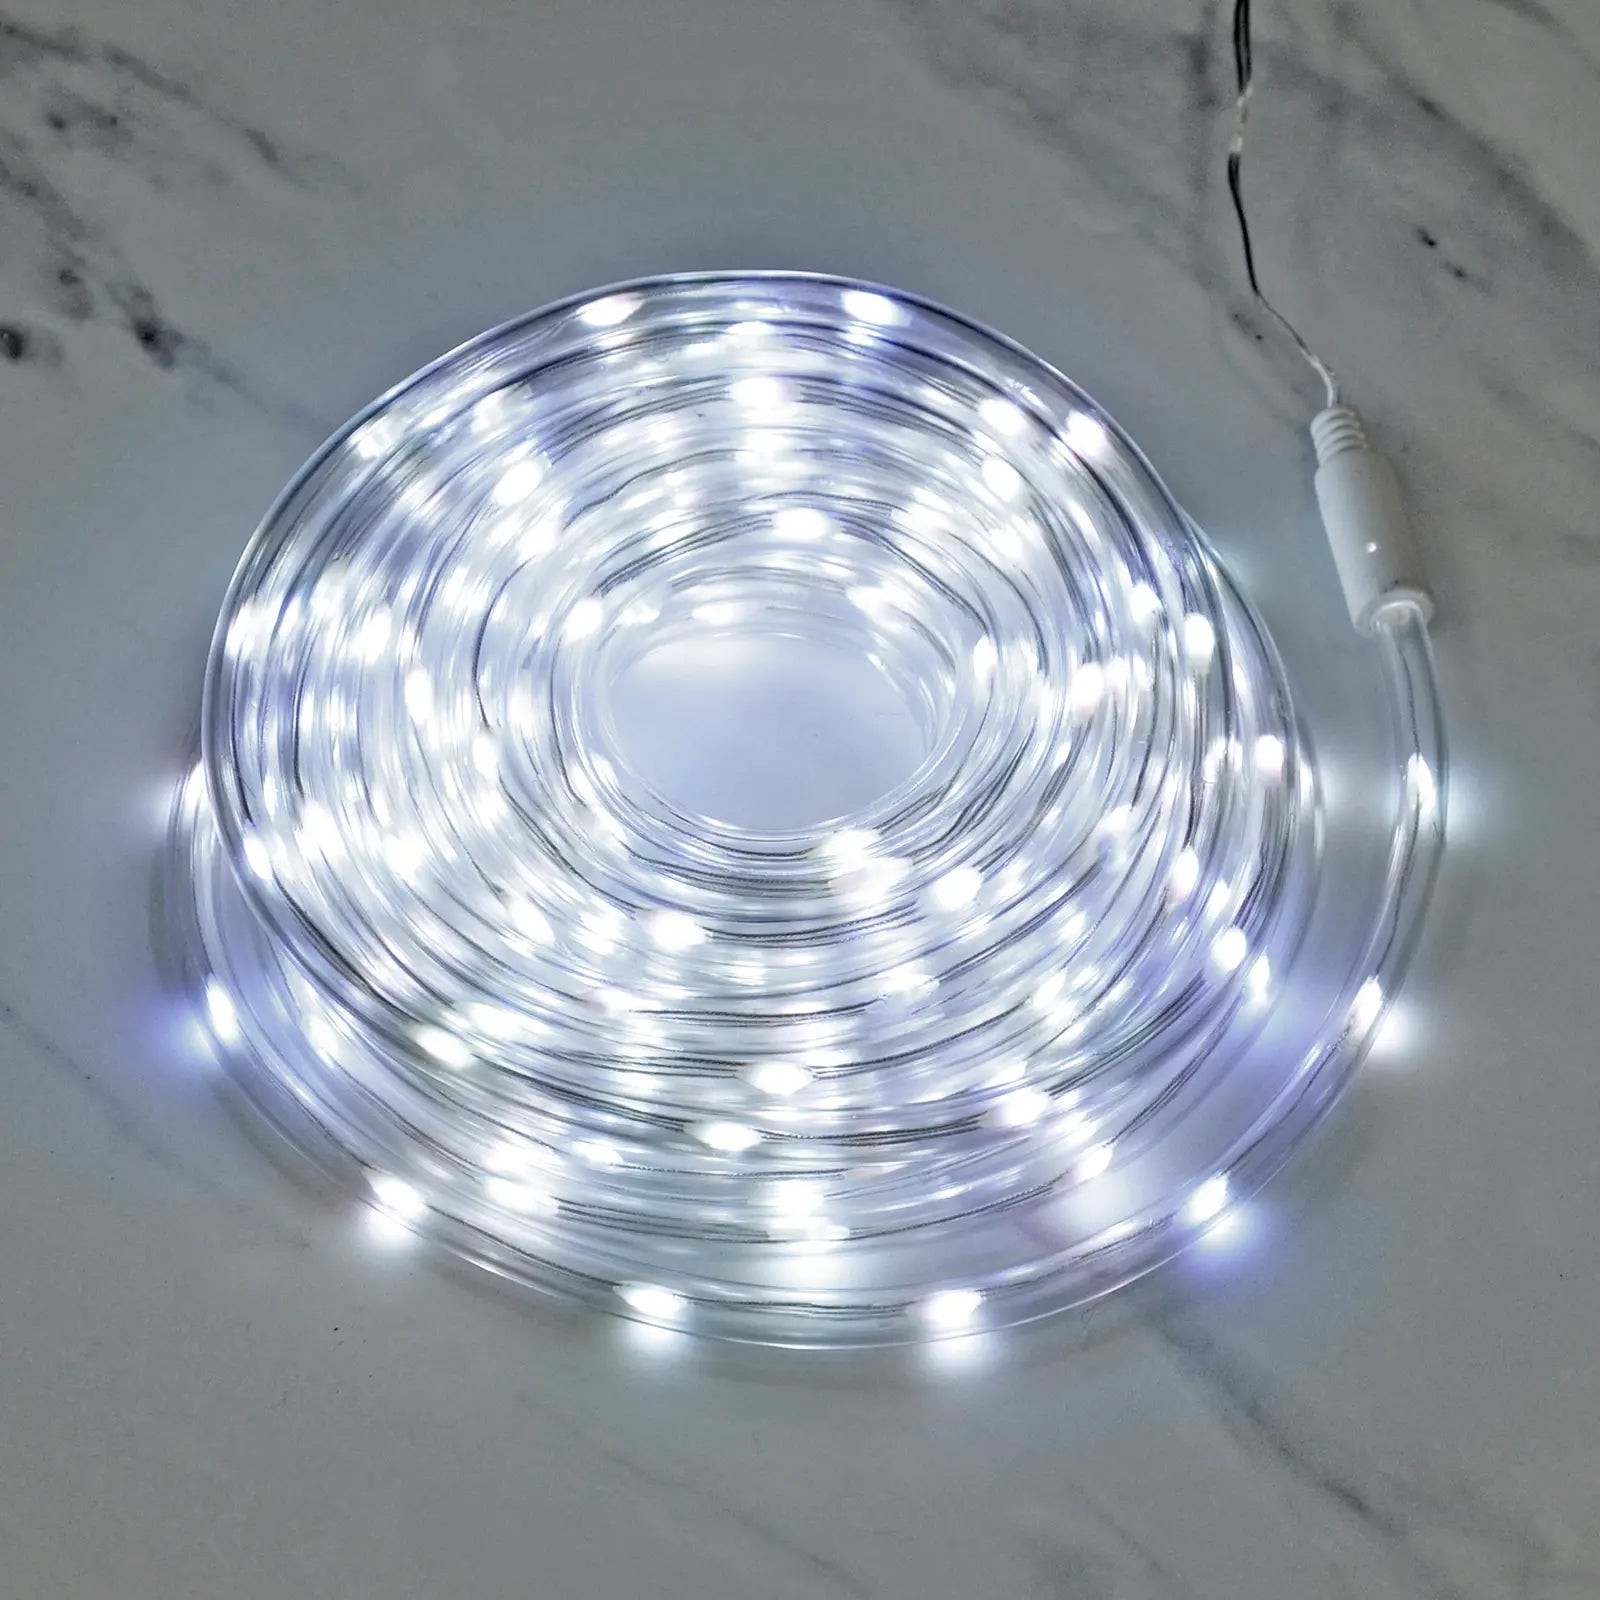 Coil of cool white LED rope light lit up on a marble floor